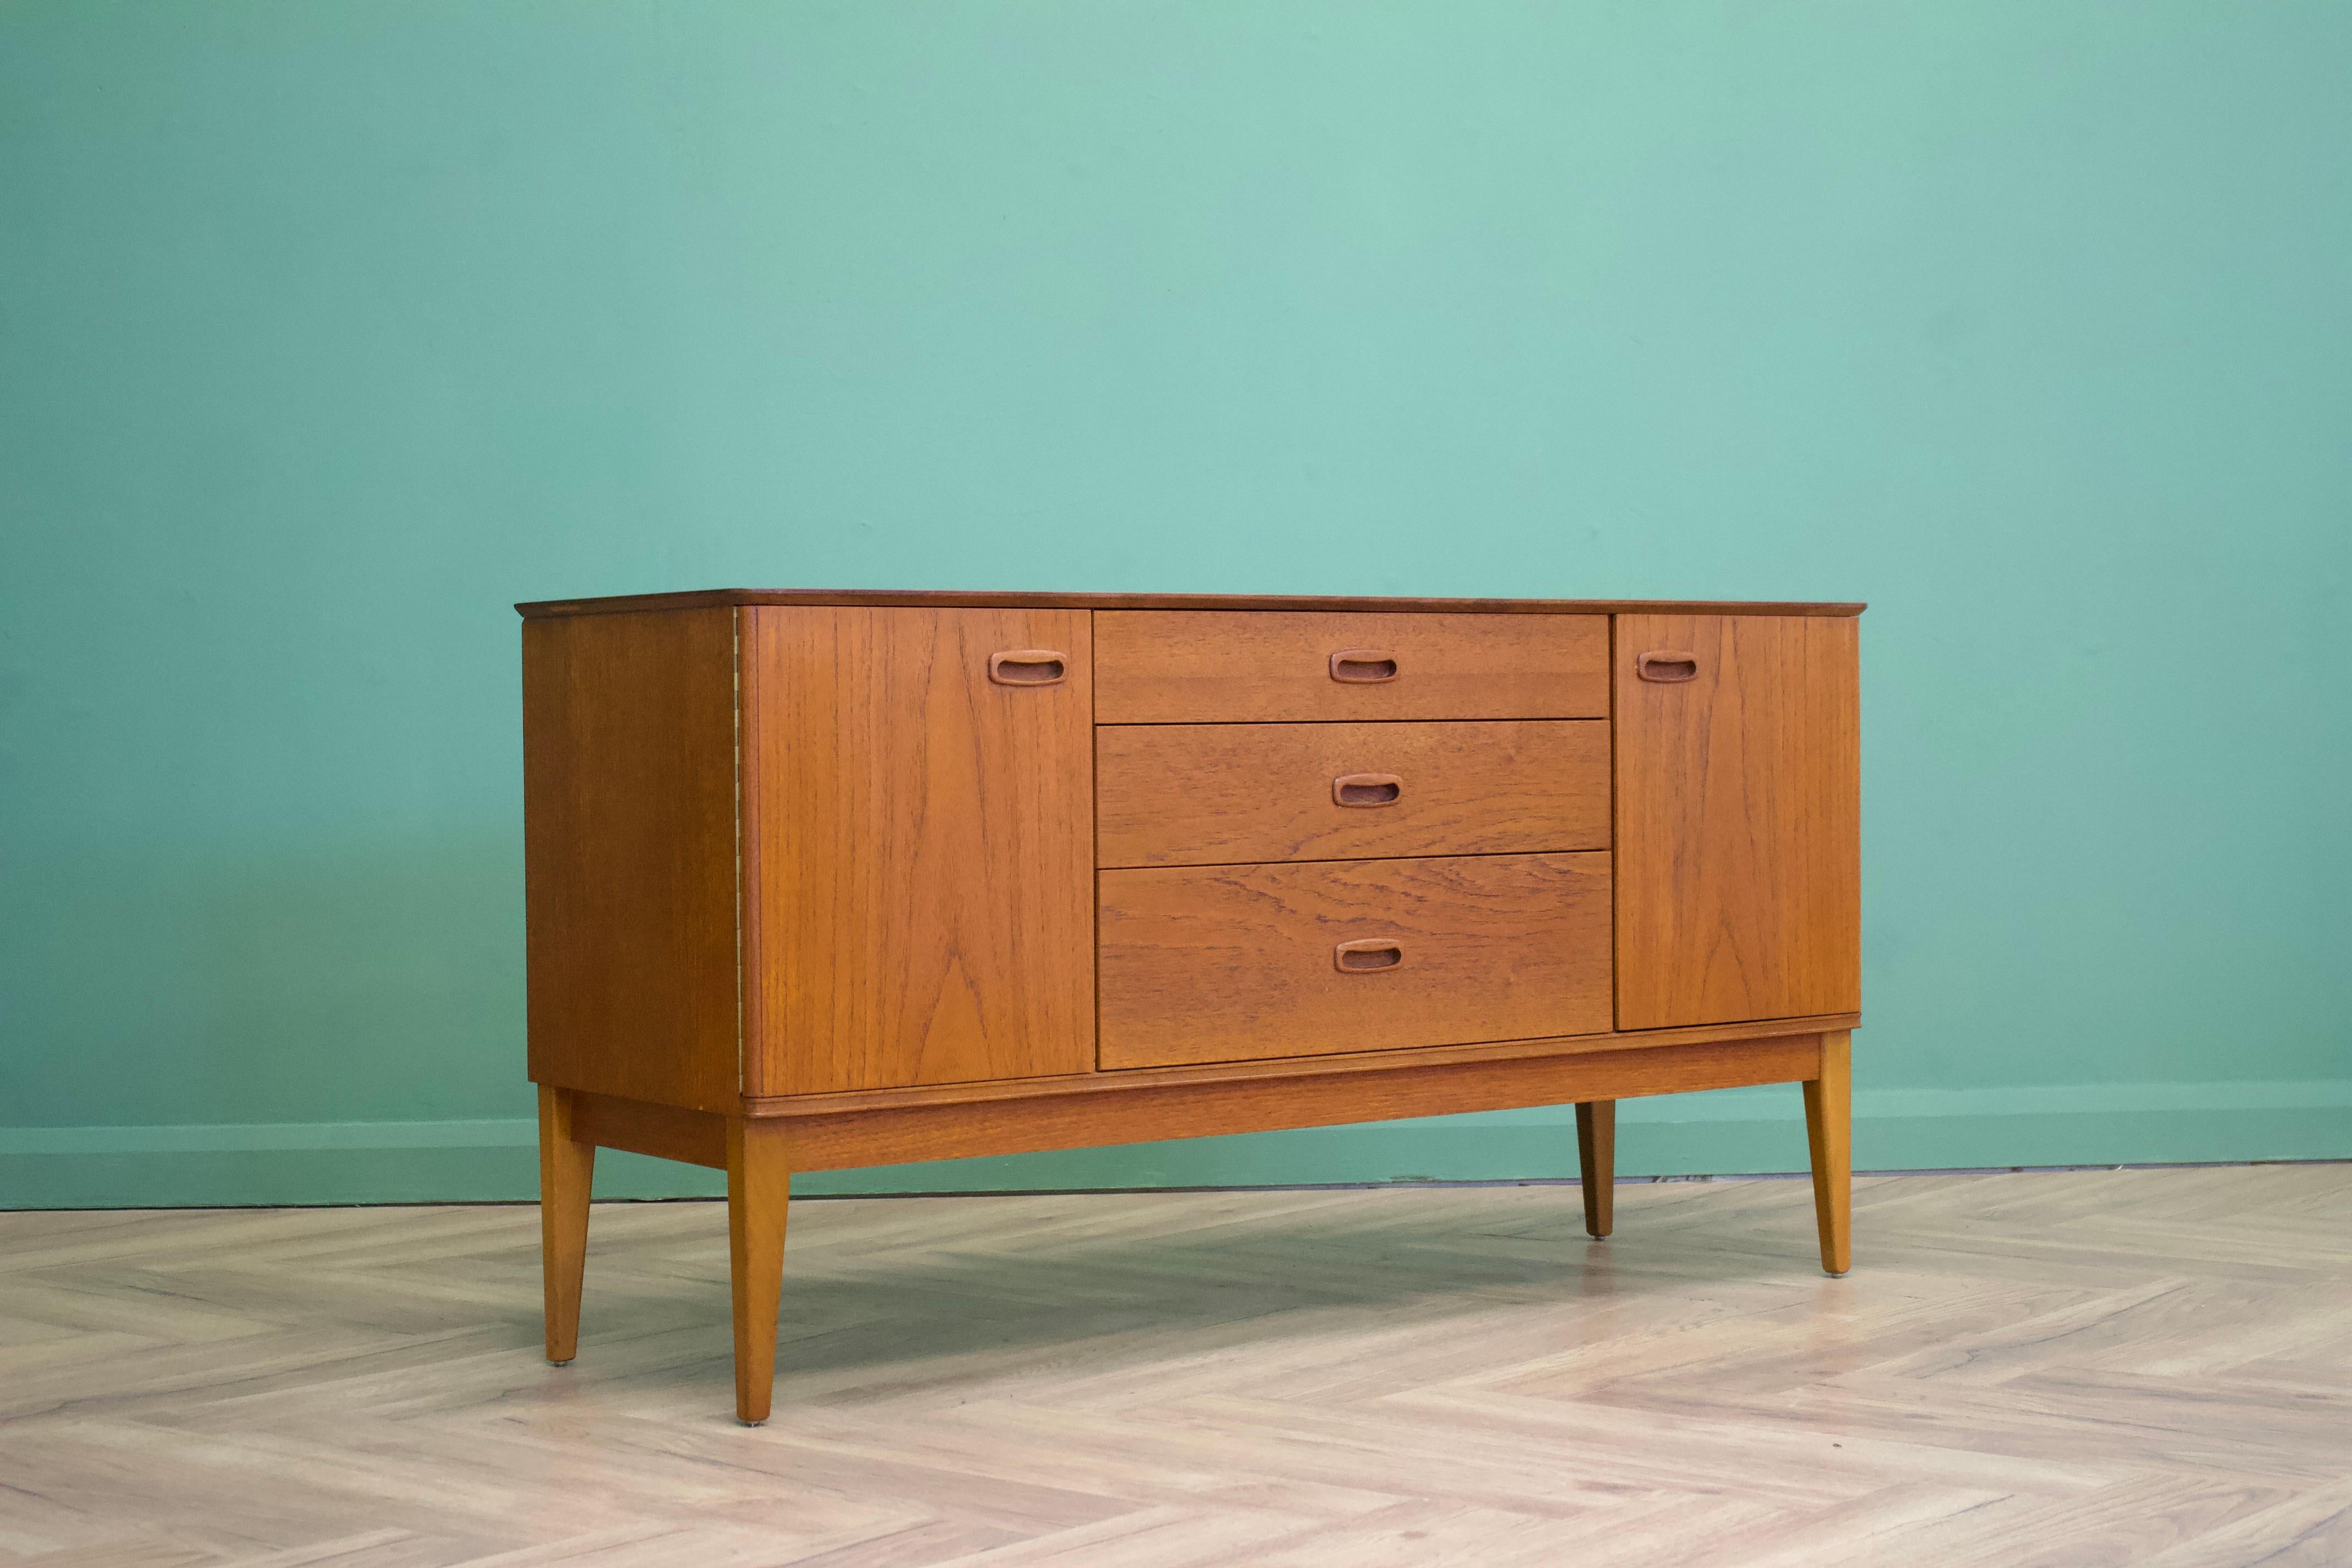 Mid-Century Modern sideboard from Austinsuite
Manufactured in the UK
Made from solid teak and real teak veneers
Featuring two cupboards and two drawers.